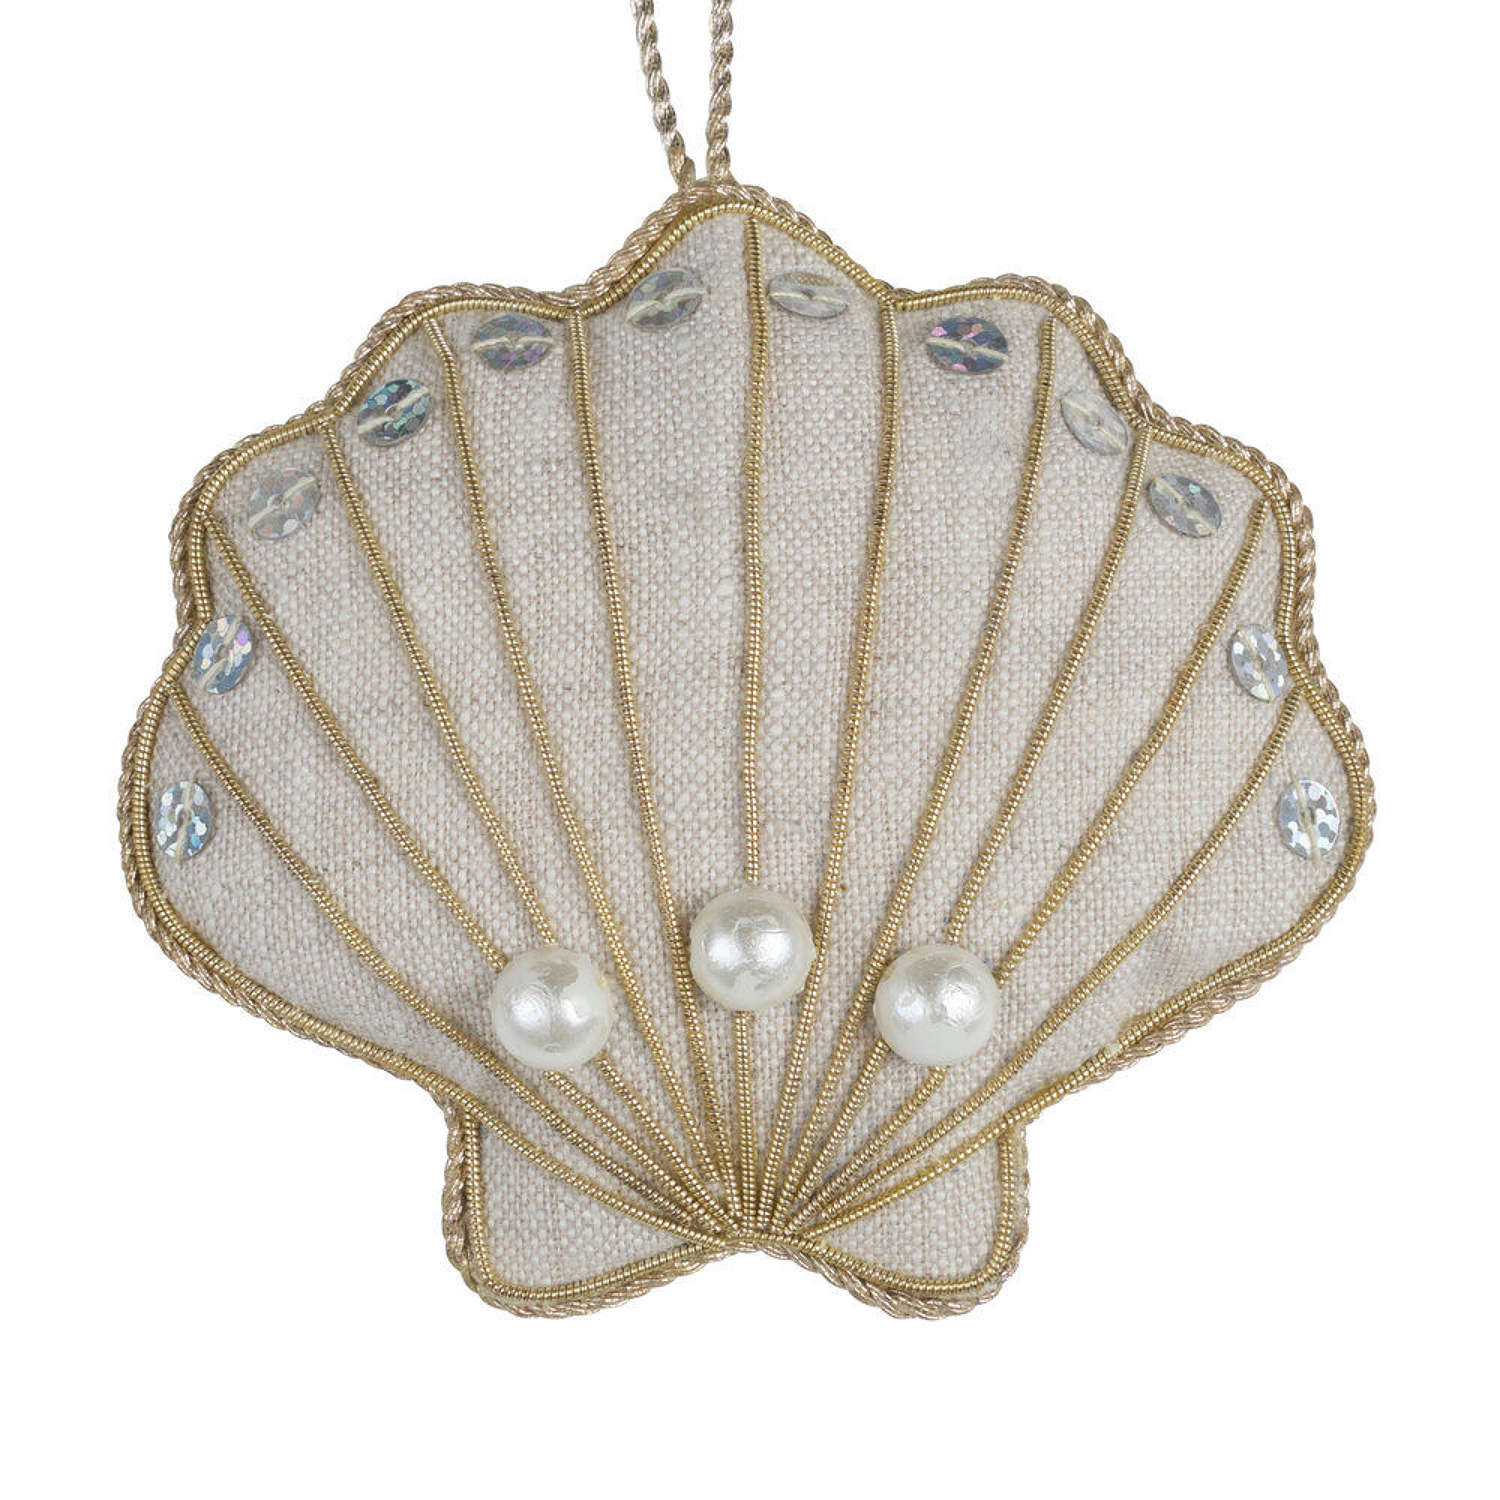 Irish Linen Oyster Shell Decoration by Katie Larmour.